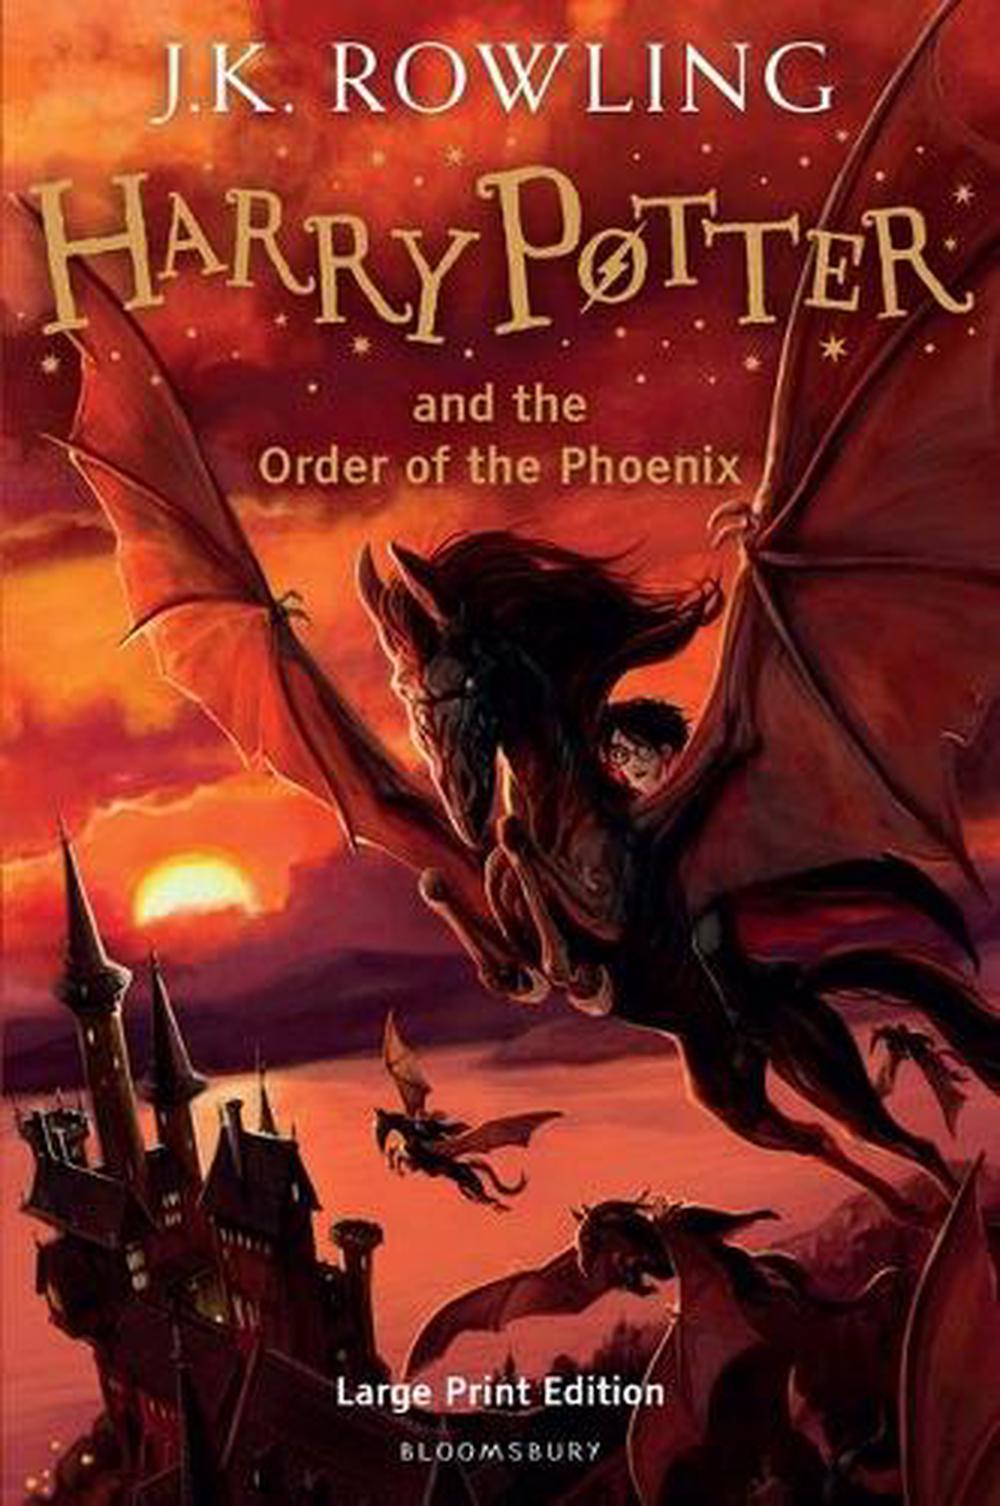 book review on harry potter and the order of phoenix